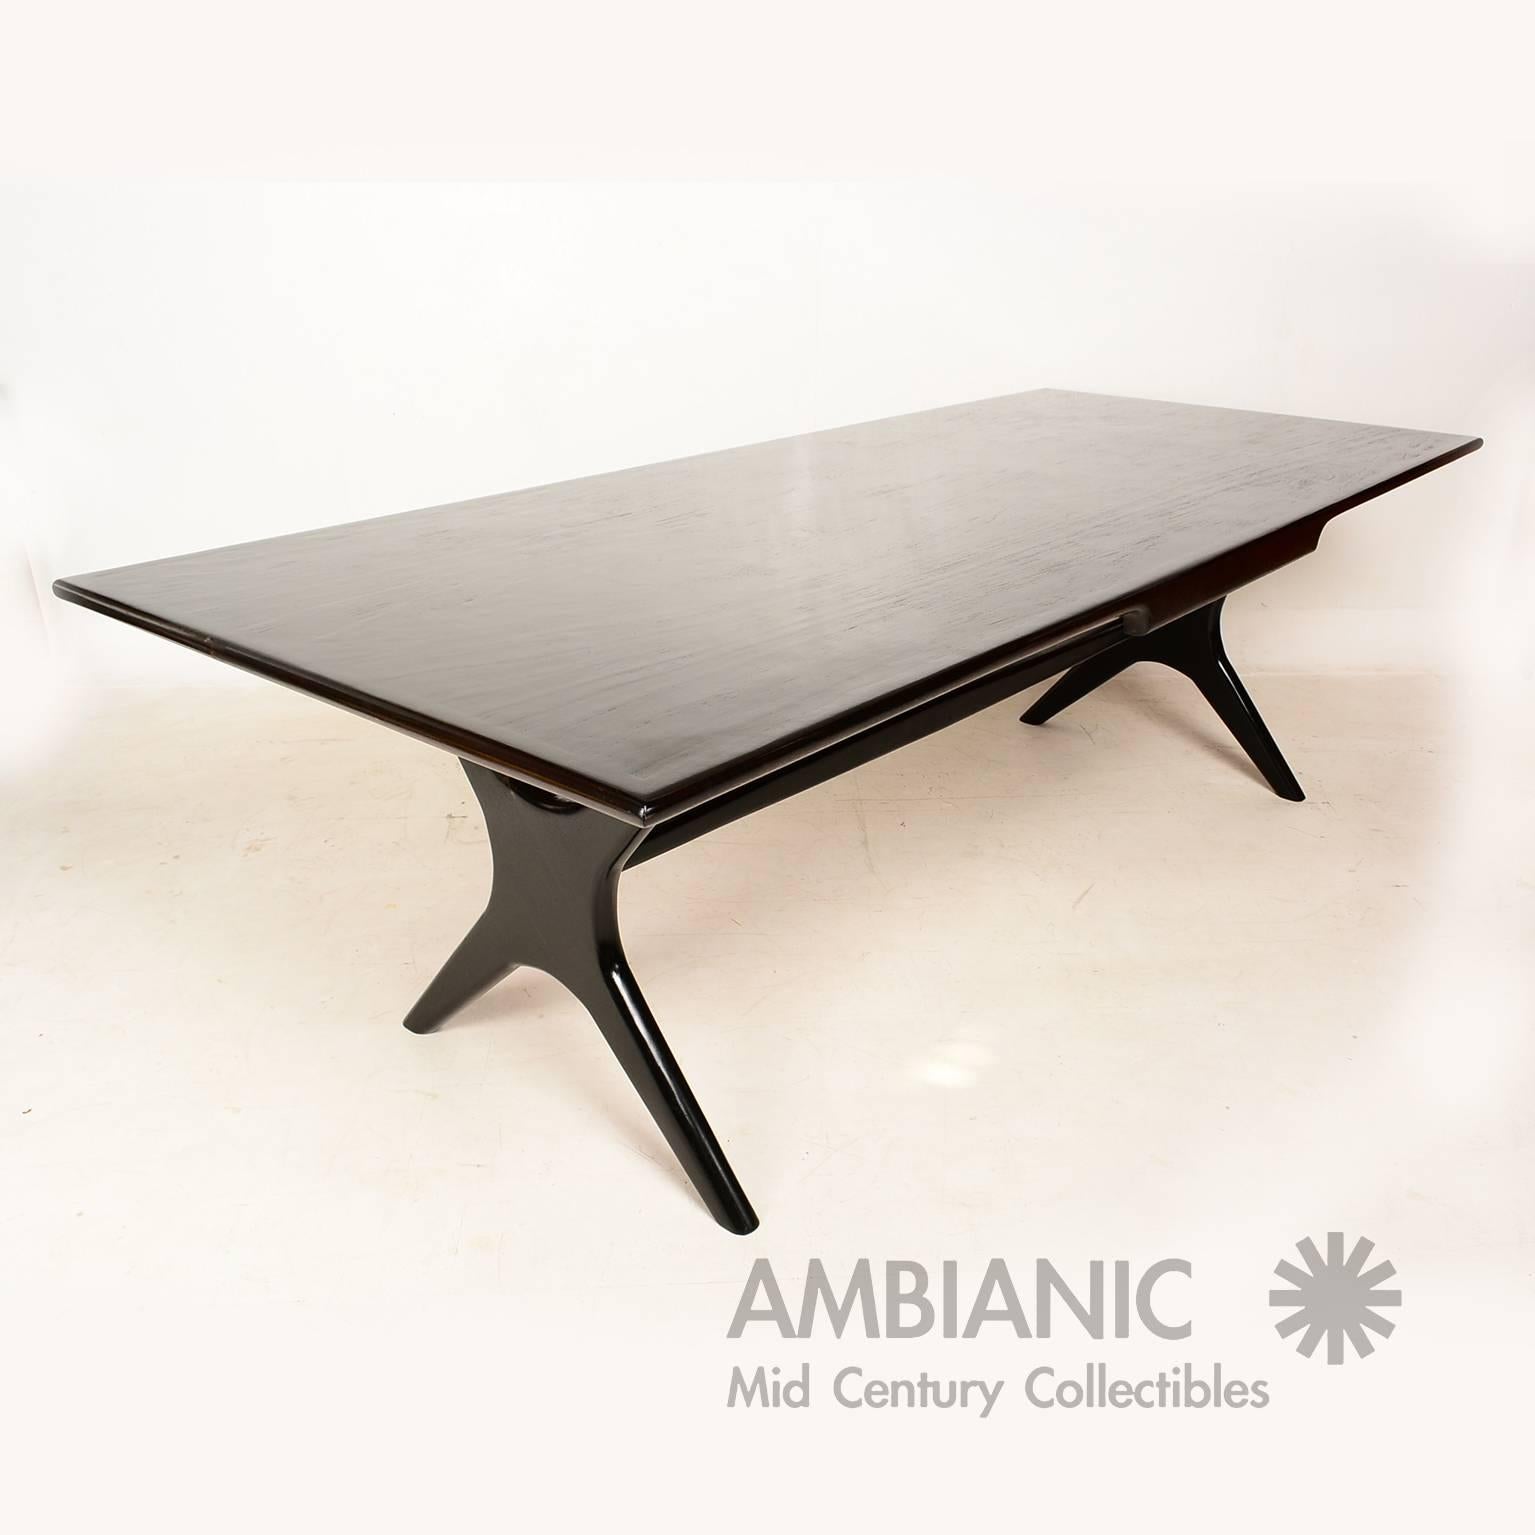 Mid-Century Modern Mexican Modernist Dining Table with 